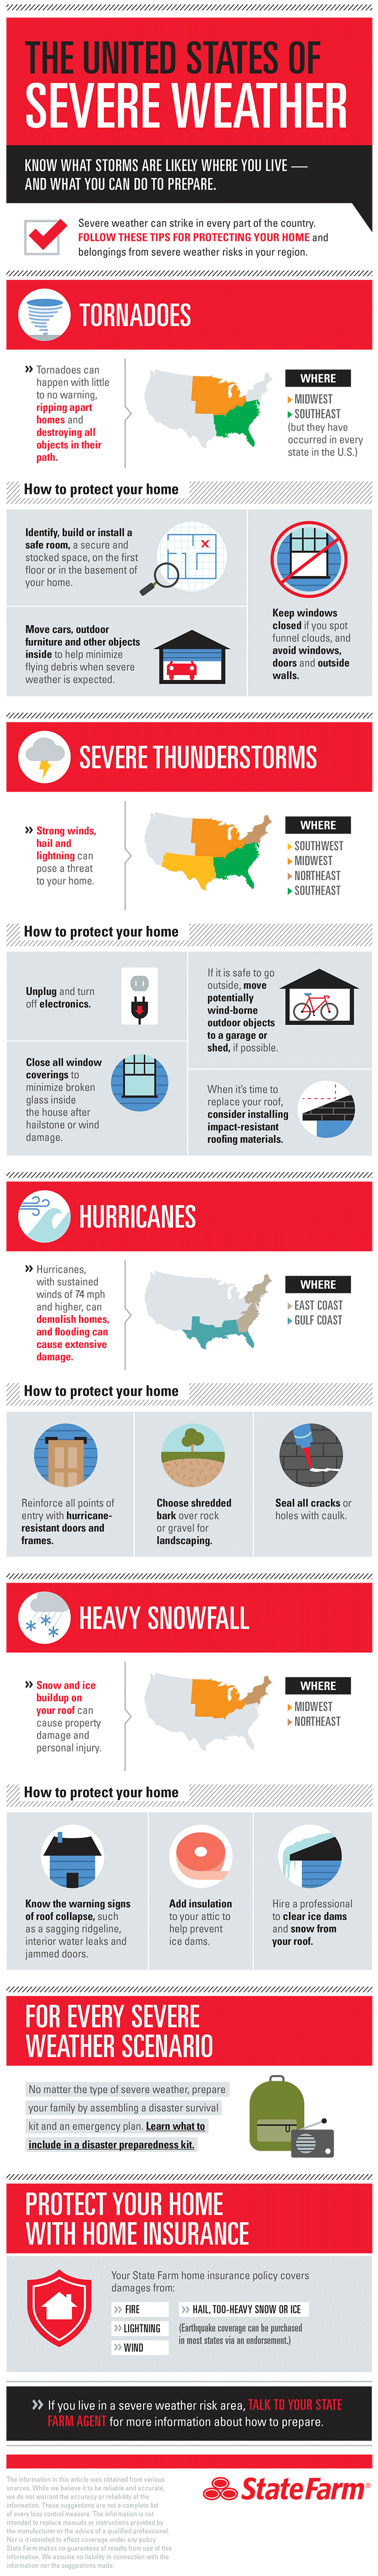 The United States of Severe Weather infographic.